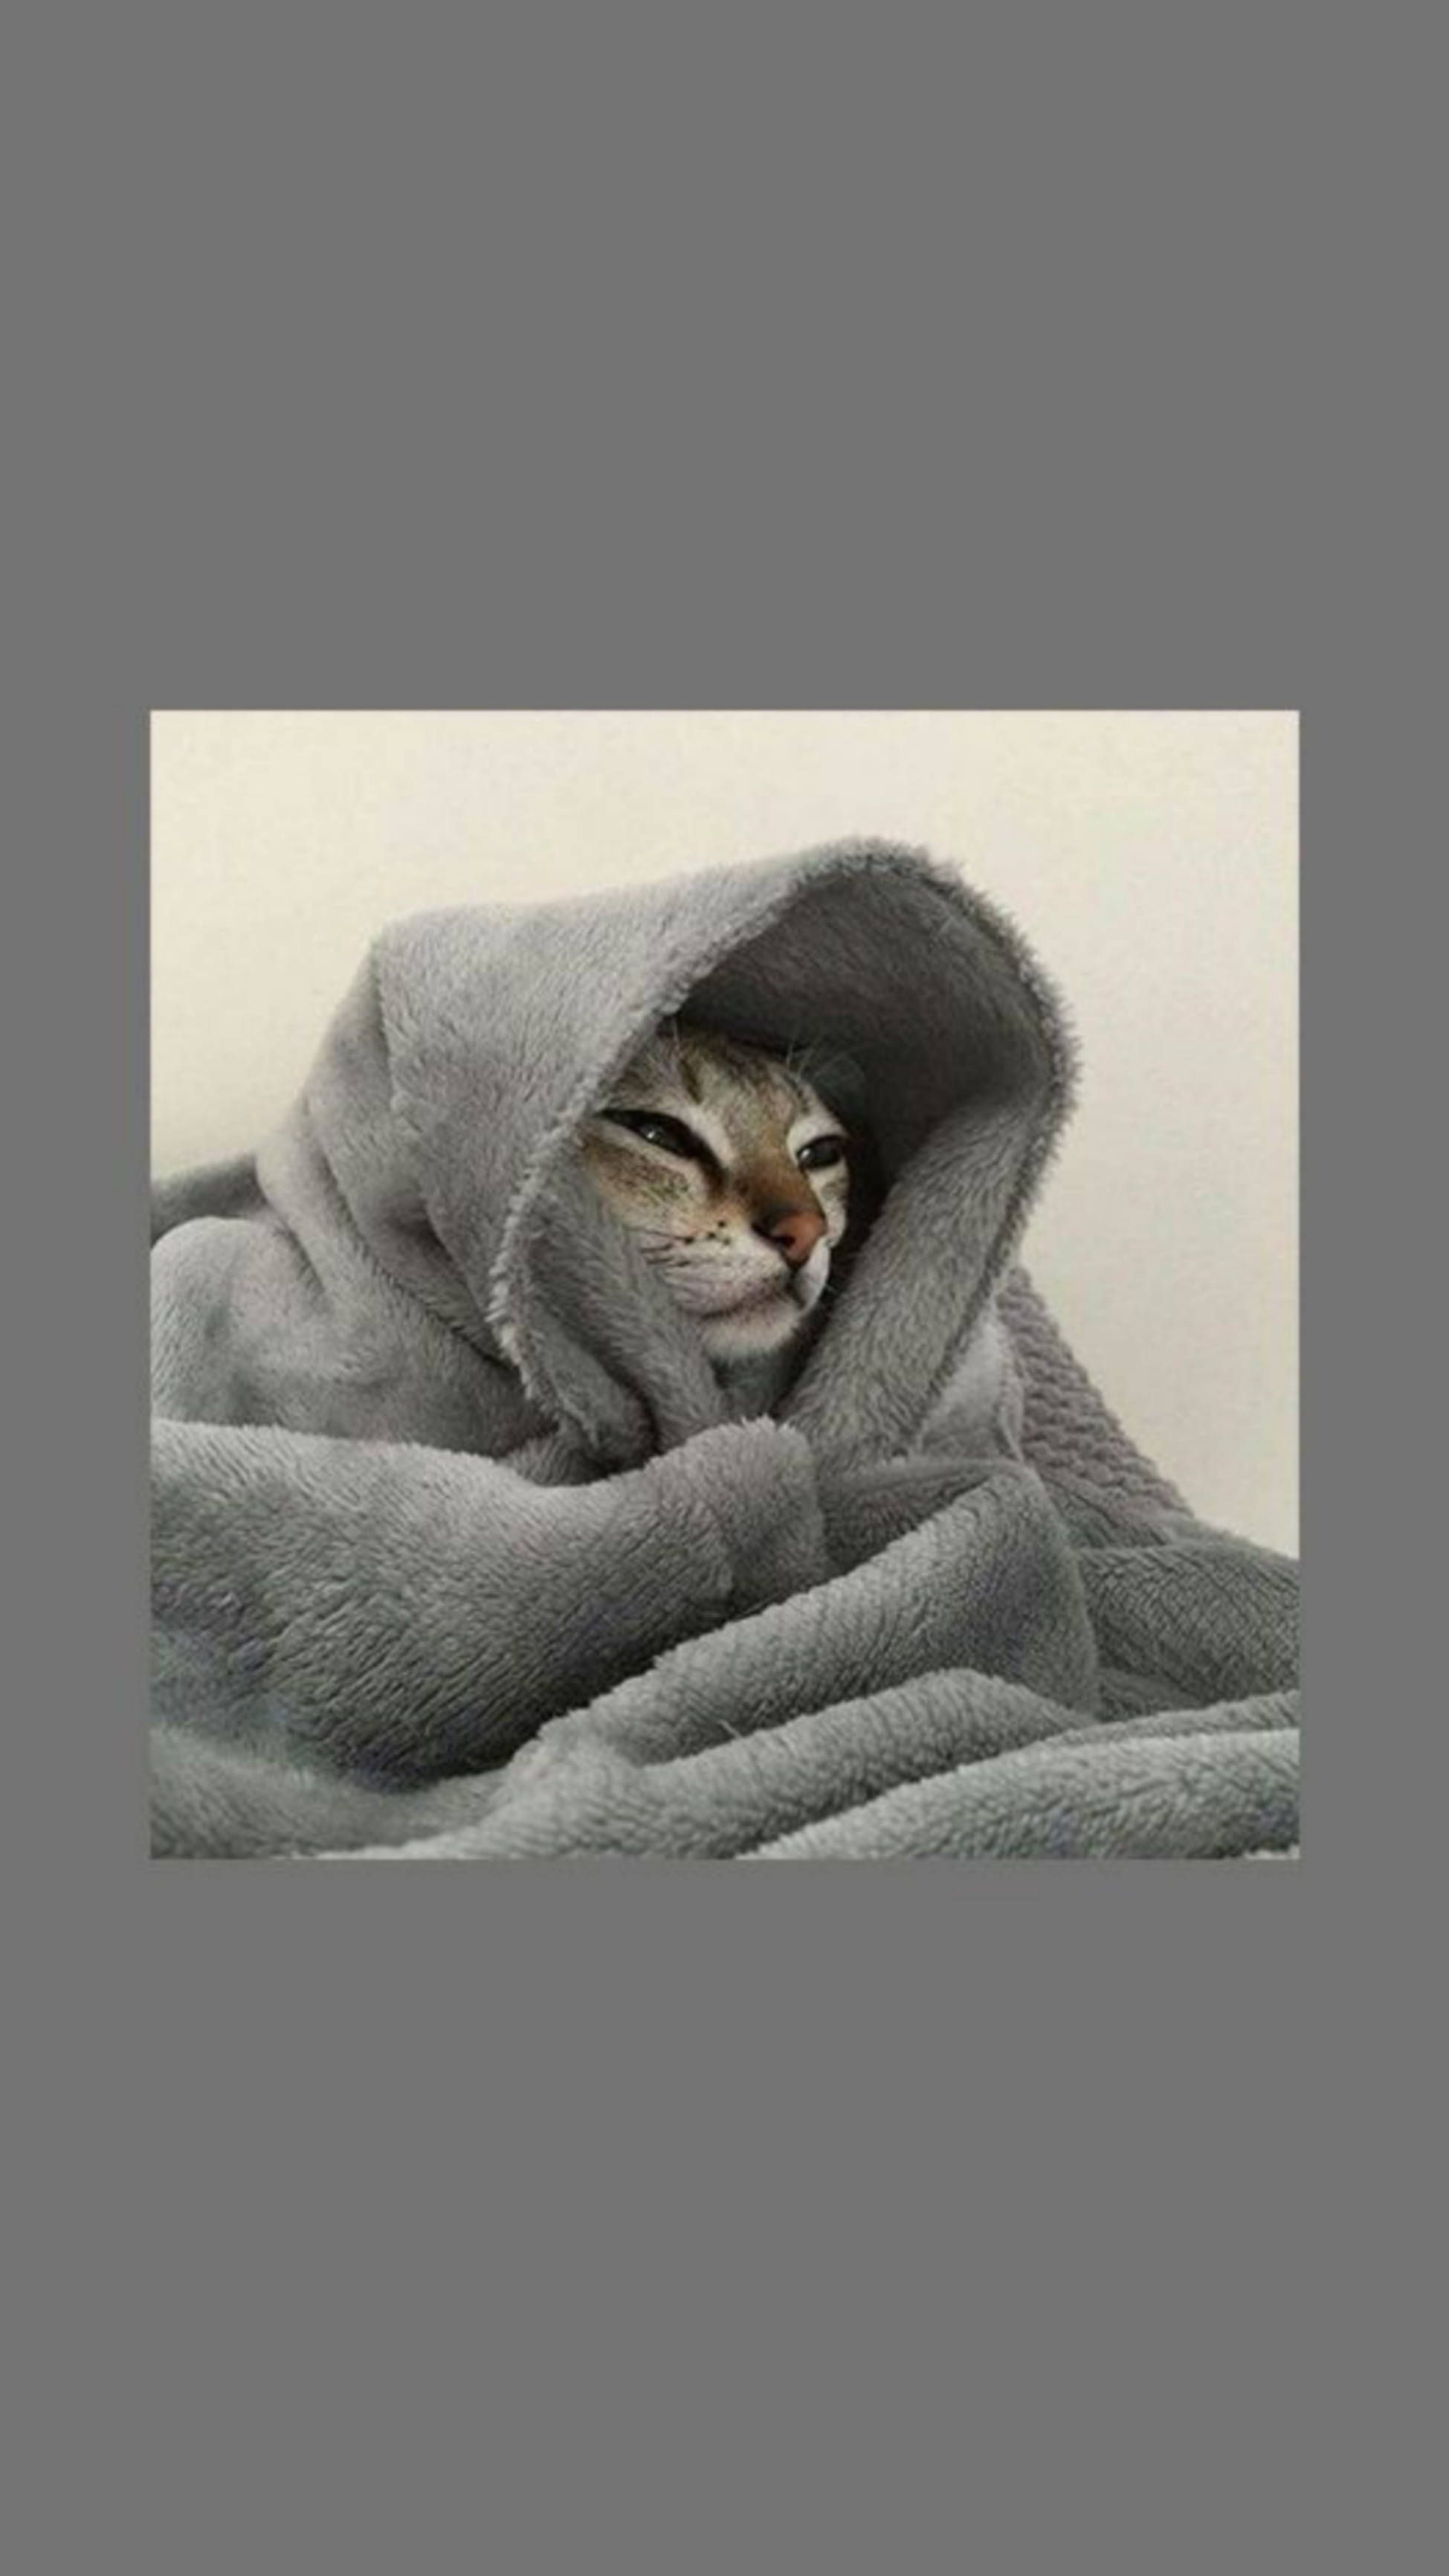 A cat wrapped in grey blanket - Cat